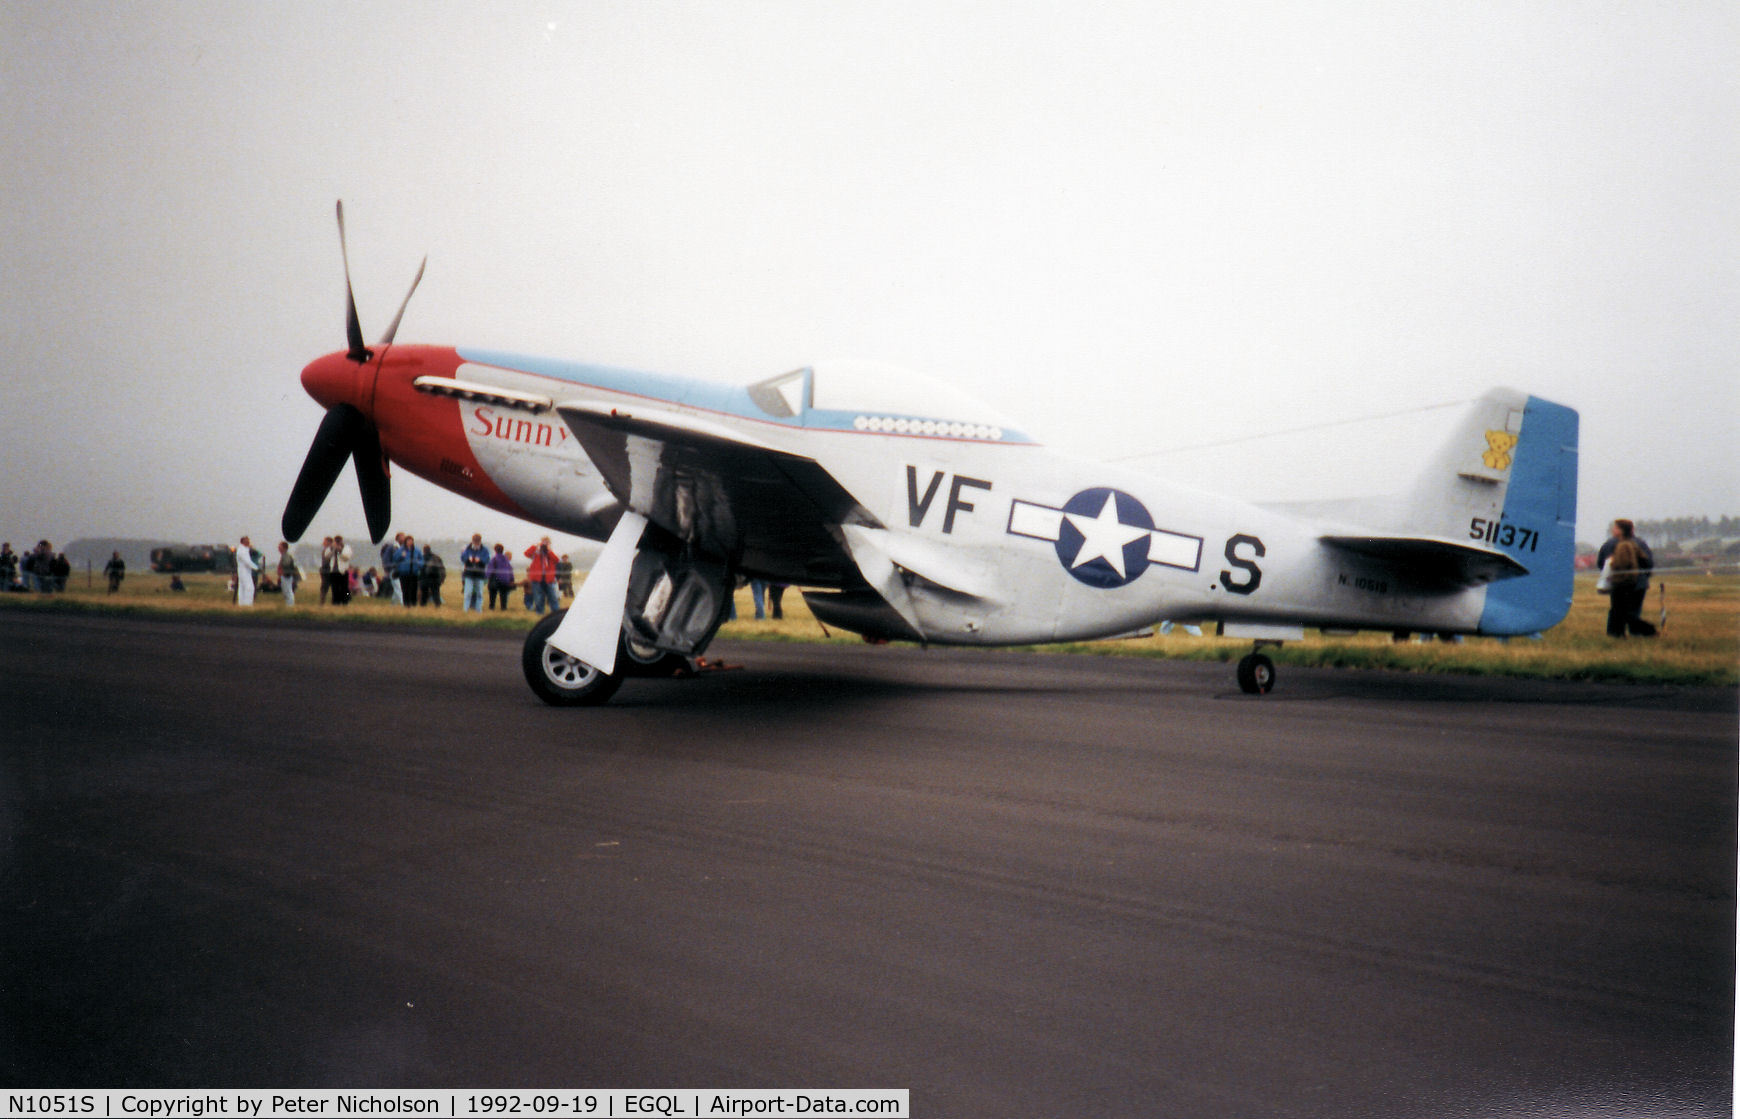 N1051S, 1963 North American P-51D Mustang C/N 124-48124 (45-11371), P-51D Mustang named Sunny VIII was on display at the 1992 RAF Leuchars Airshow. Sadly, this aircraft was in a fatal crash in July 1995 as N51KF.